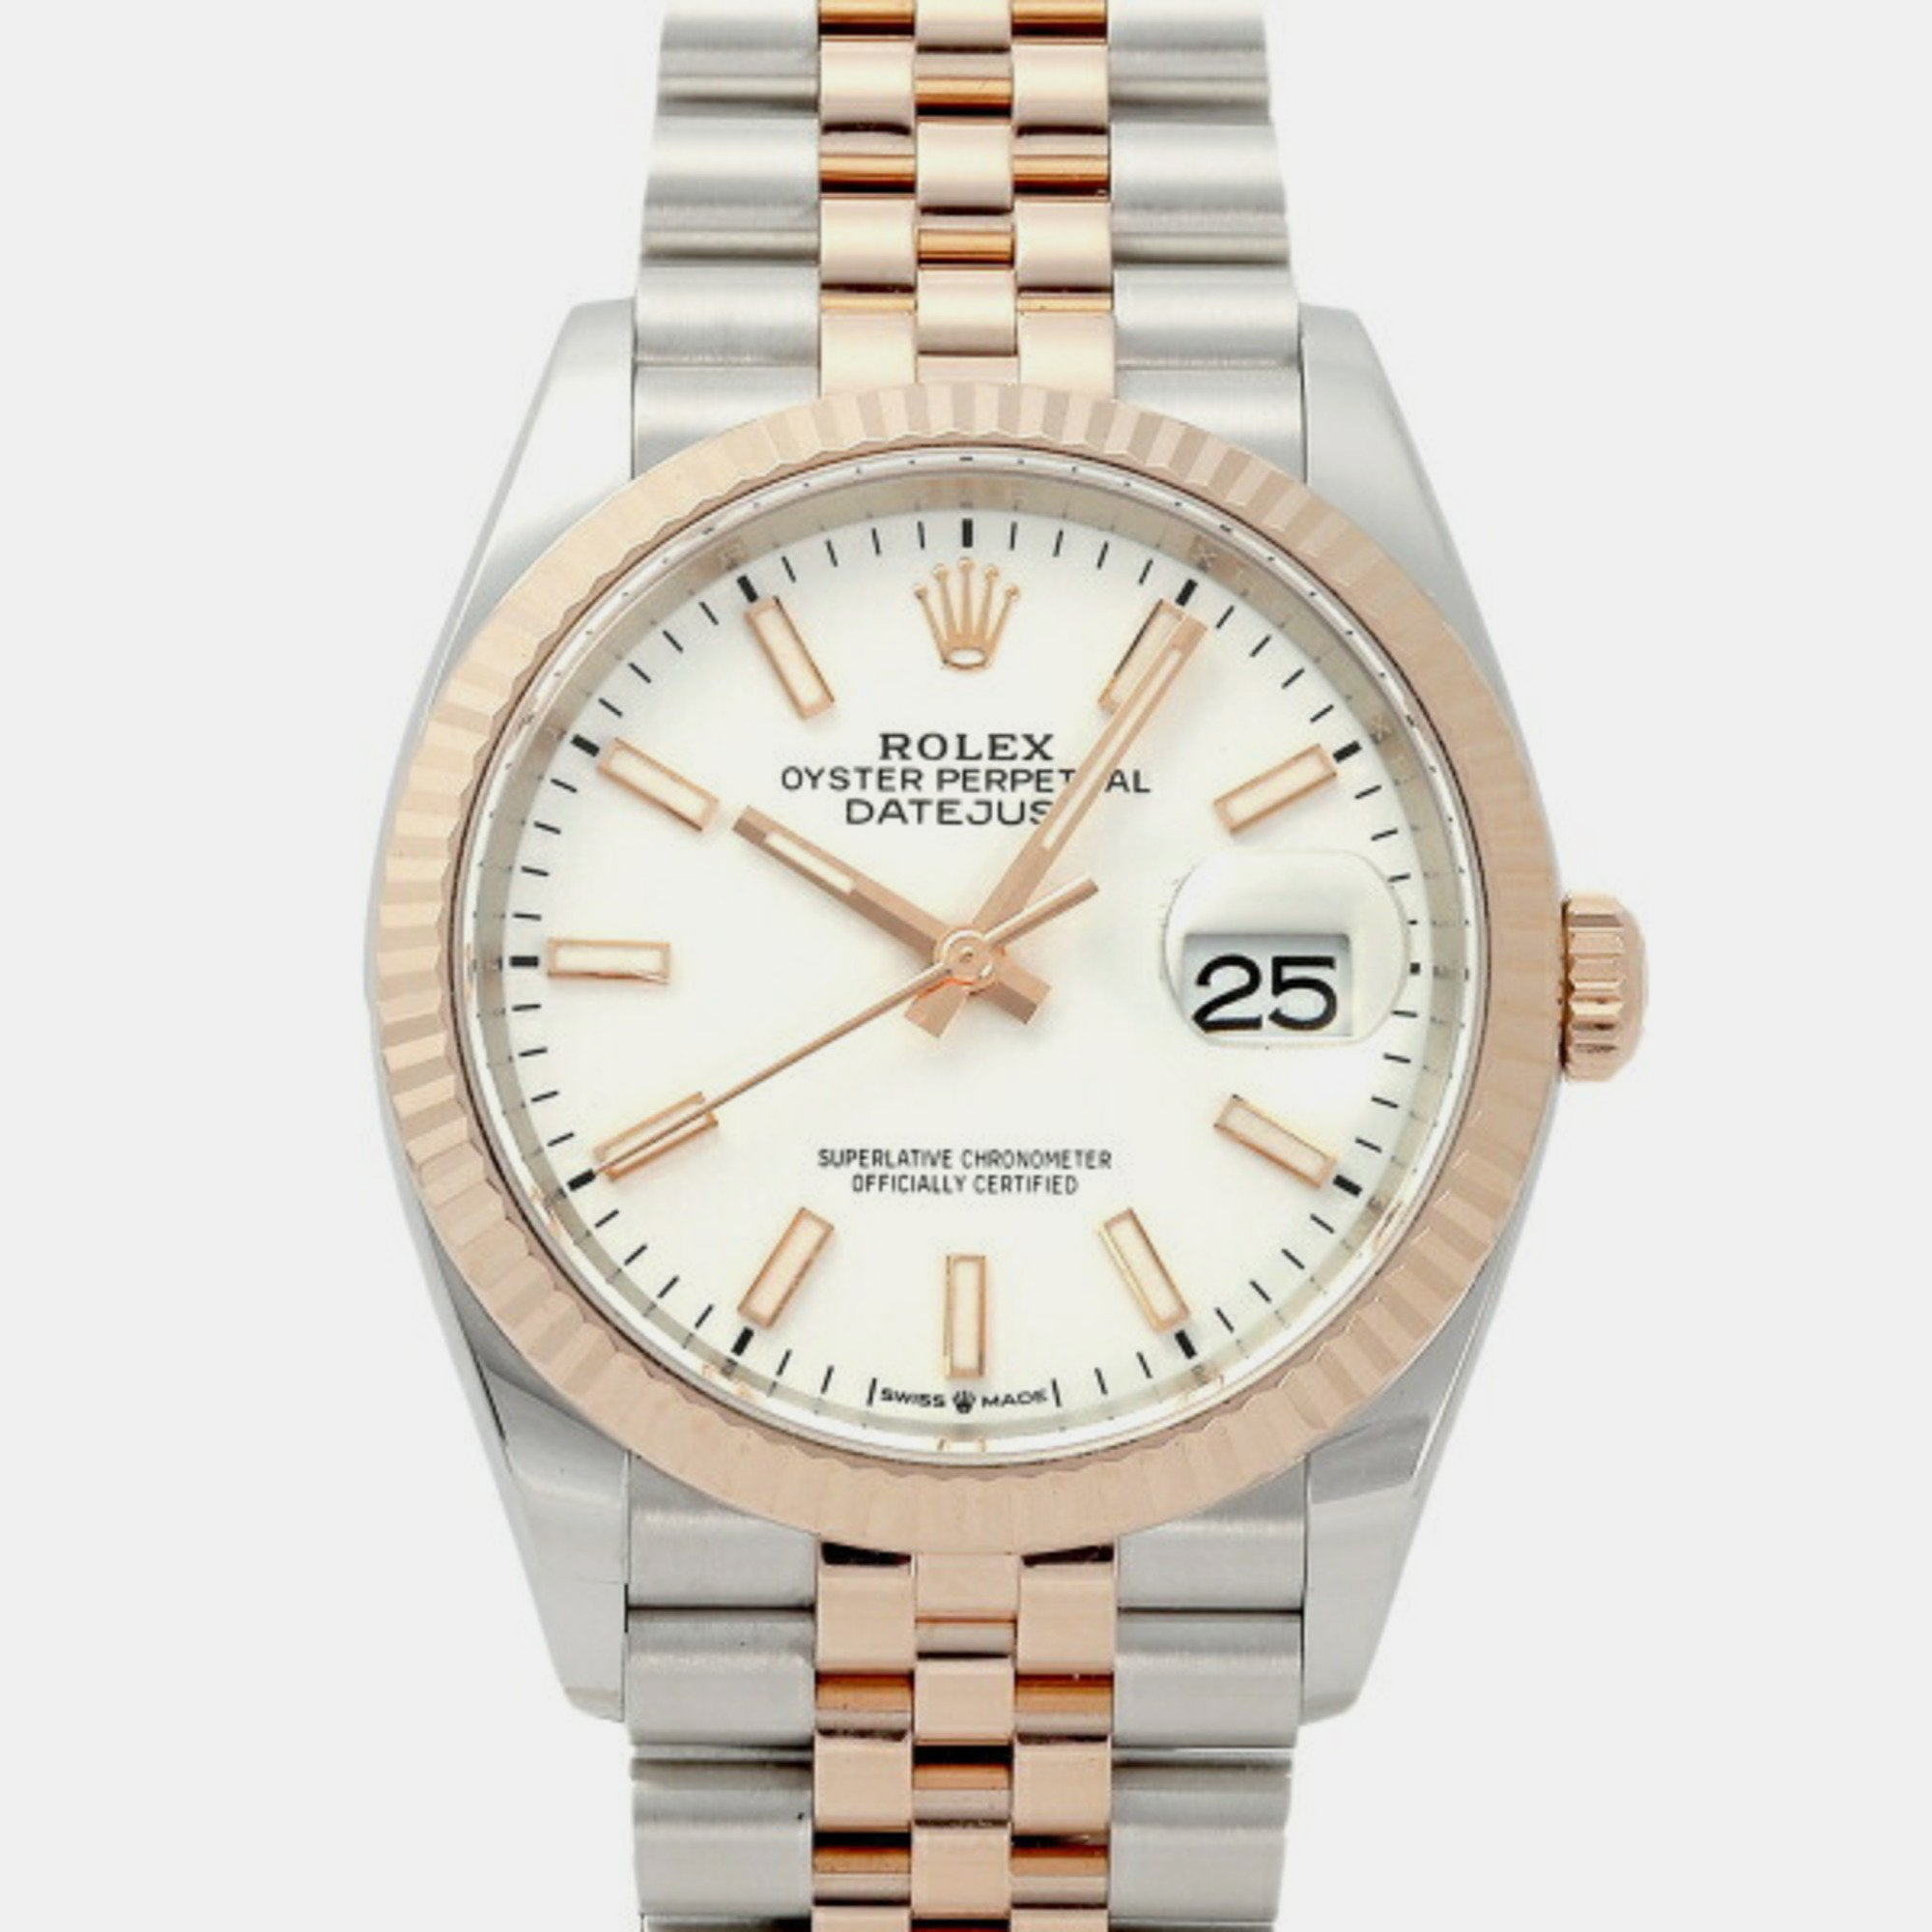 Rolex white 18k rose gold and stainless steel datejust 126231 automatic men's wristwatch 36 mm